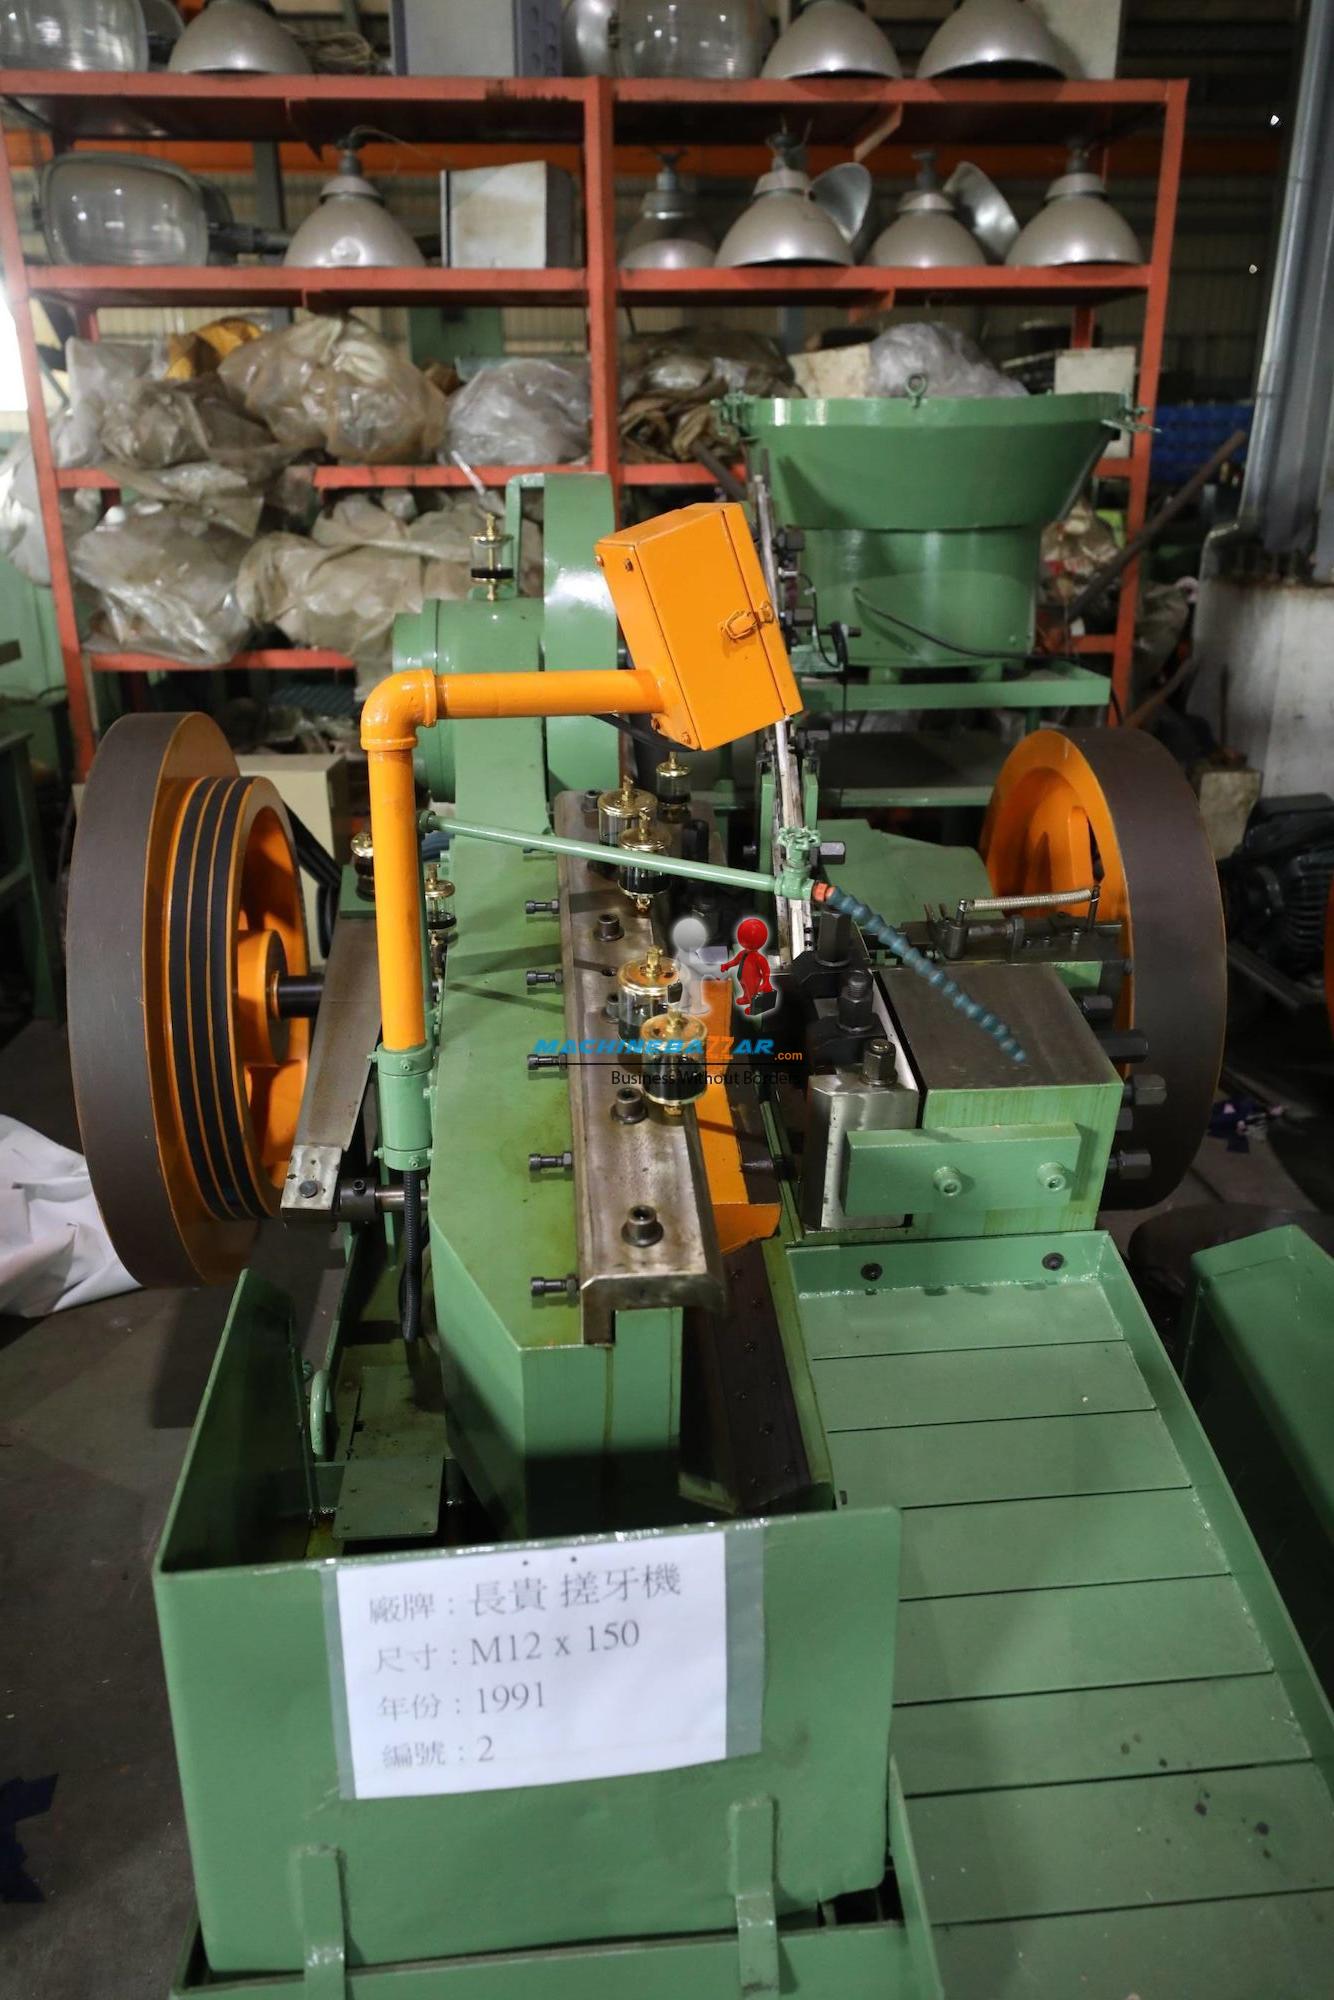 M12 x 150 Charng Guey Flate die thread rolling machine